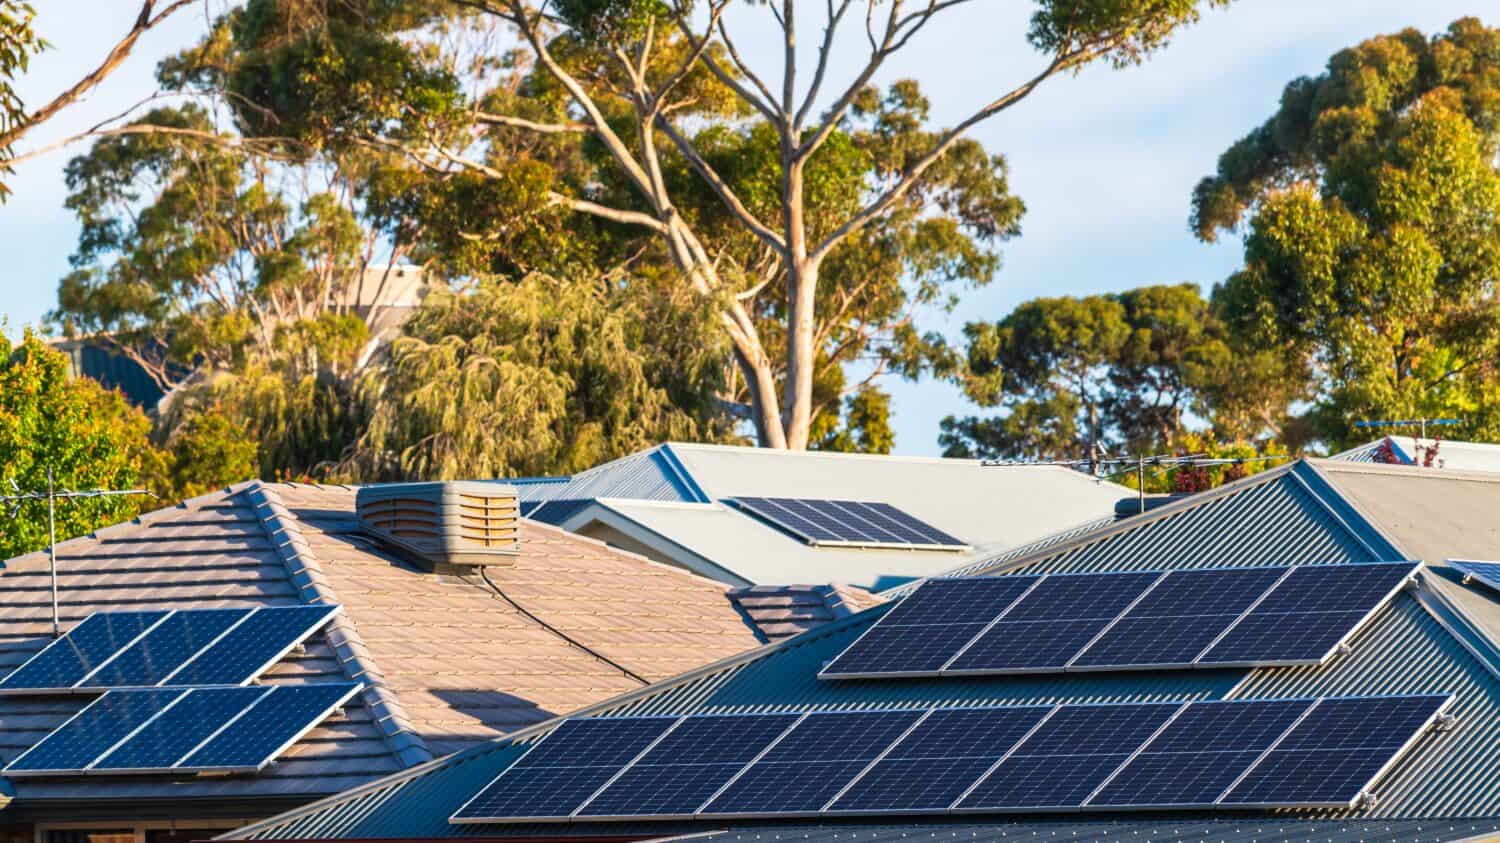 House roof with solar panels installed in the suburban area of South Australia